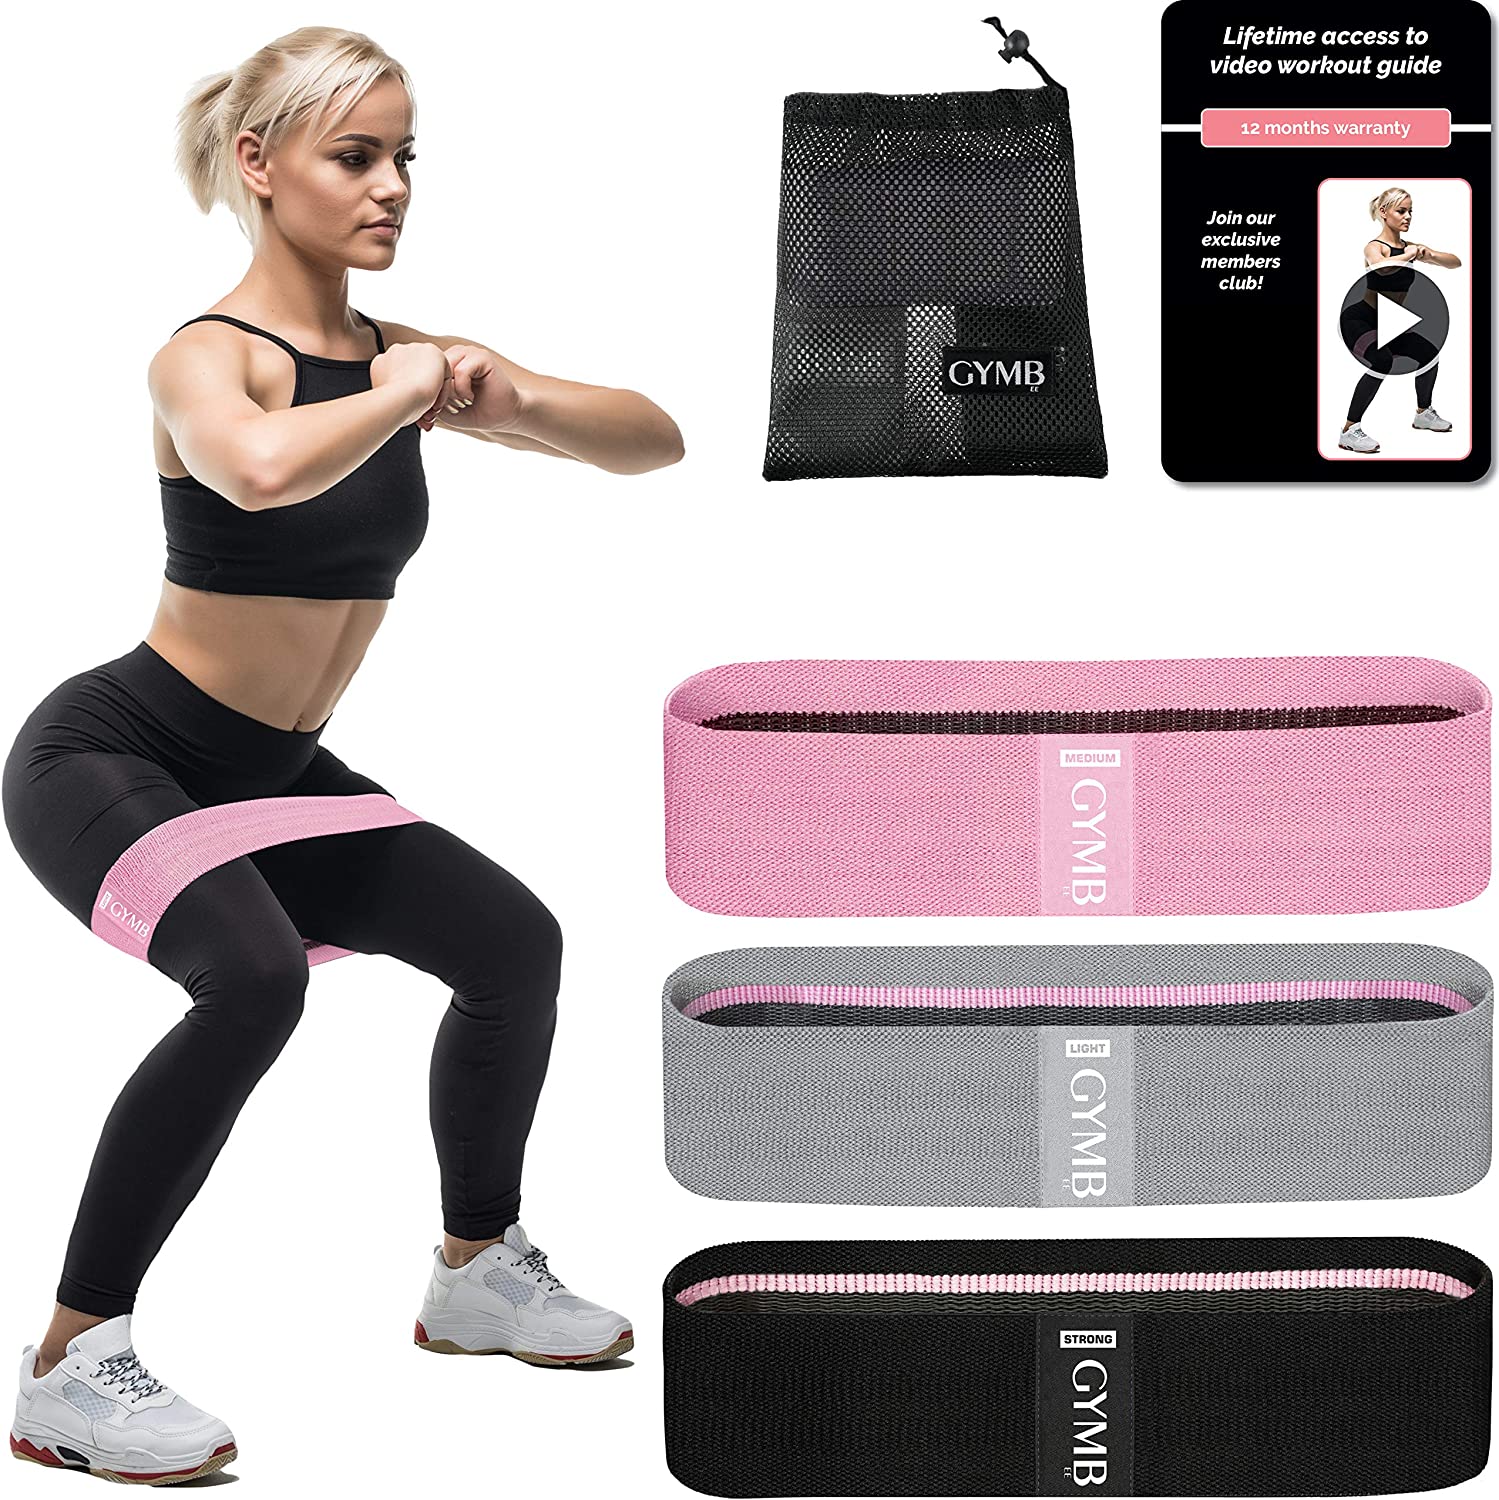 Non Slip Elastic Resistance Loops Hip Thigh Squat Bands 5 Levels Workout Bands Exercise Bands for Working Out Legs and Butt Fitness Bands Allvodes Resistance Bands for Women Booty Bands 